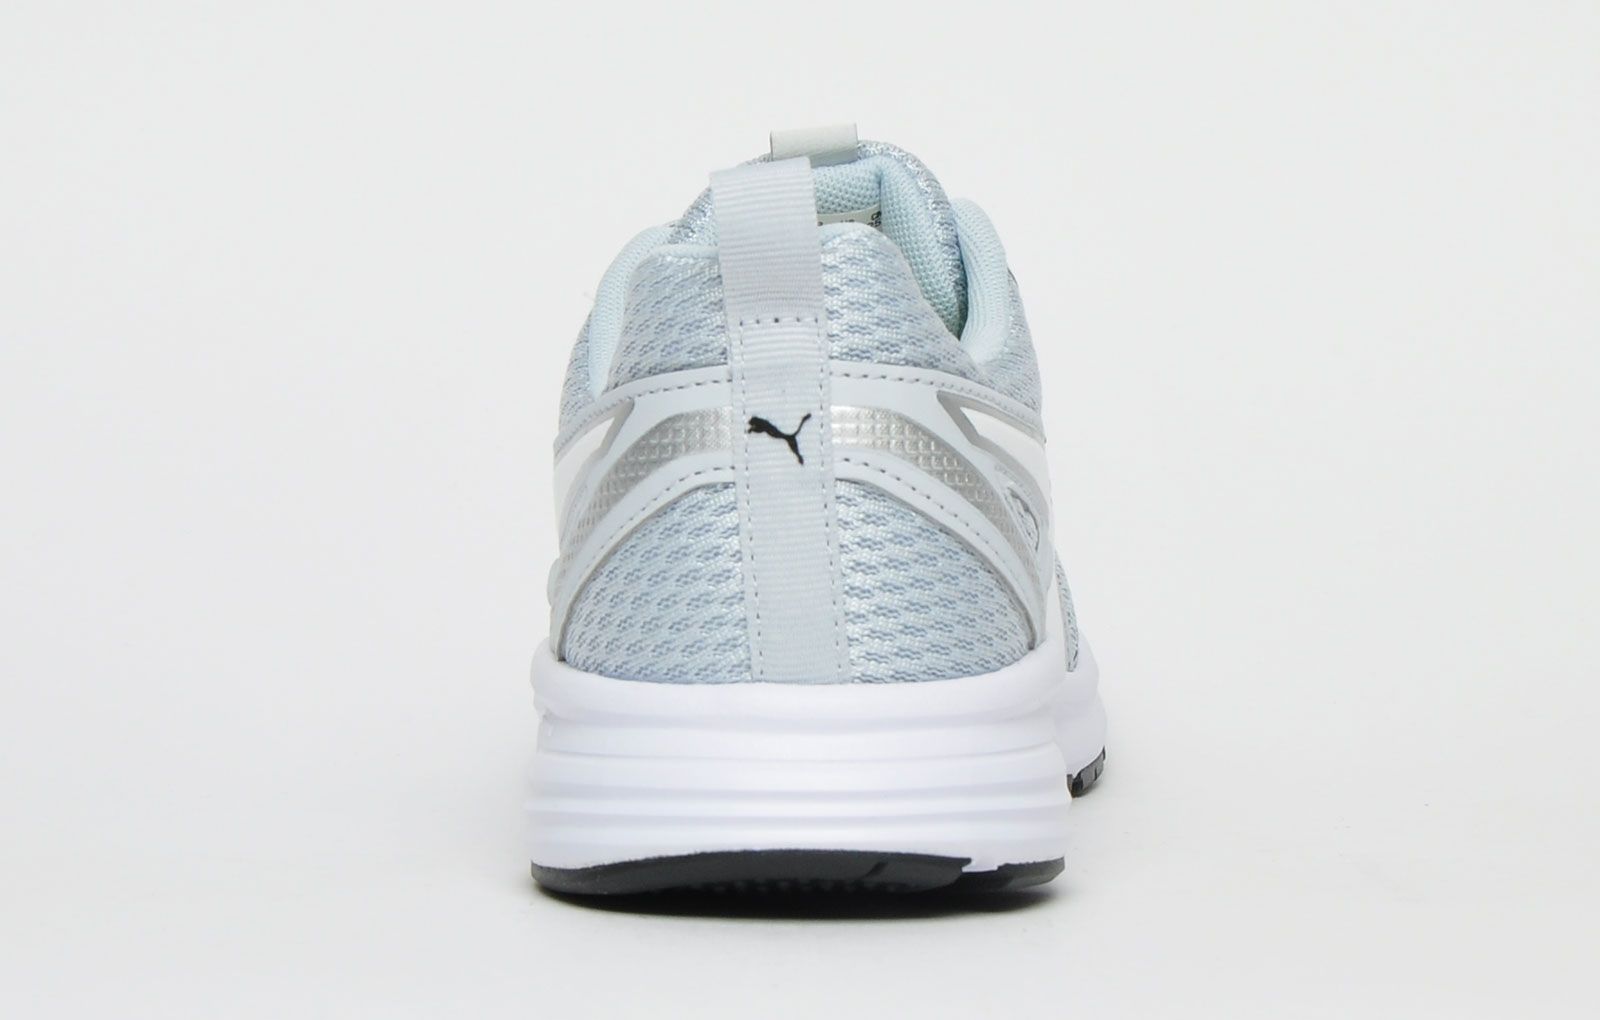 <p>These Mens Puma Pure Jogger Trainers give a clean and classic look combining sleek, textile mesh uppers with synthetic overlays with a progressive running-inspired silhouette giving them a modern and clean look. <br></p><p class=